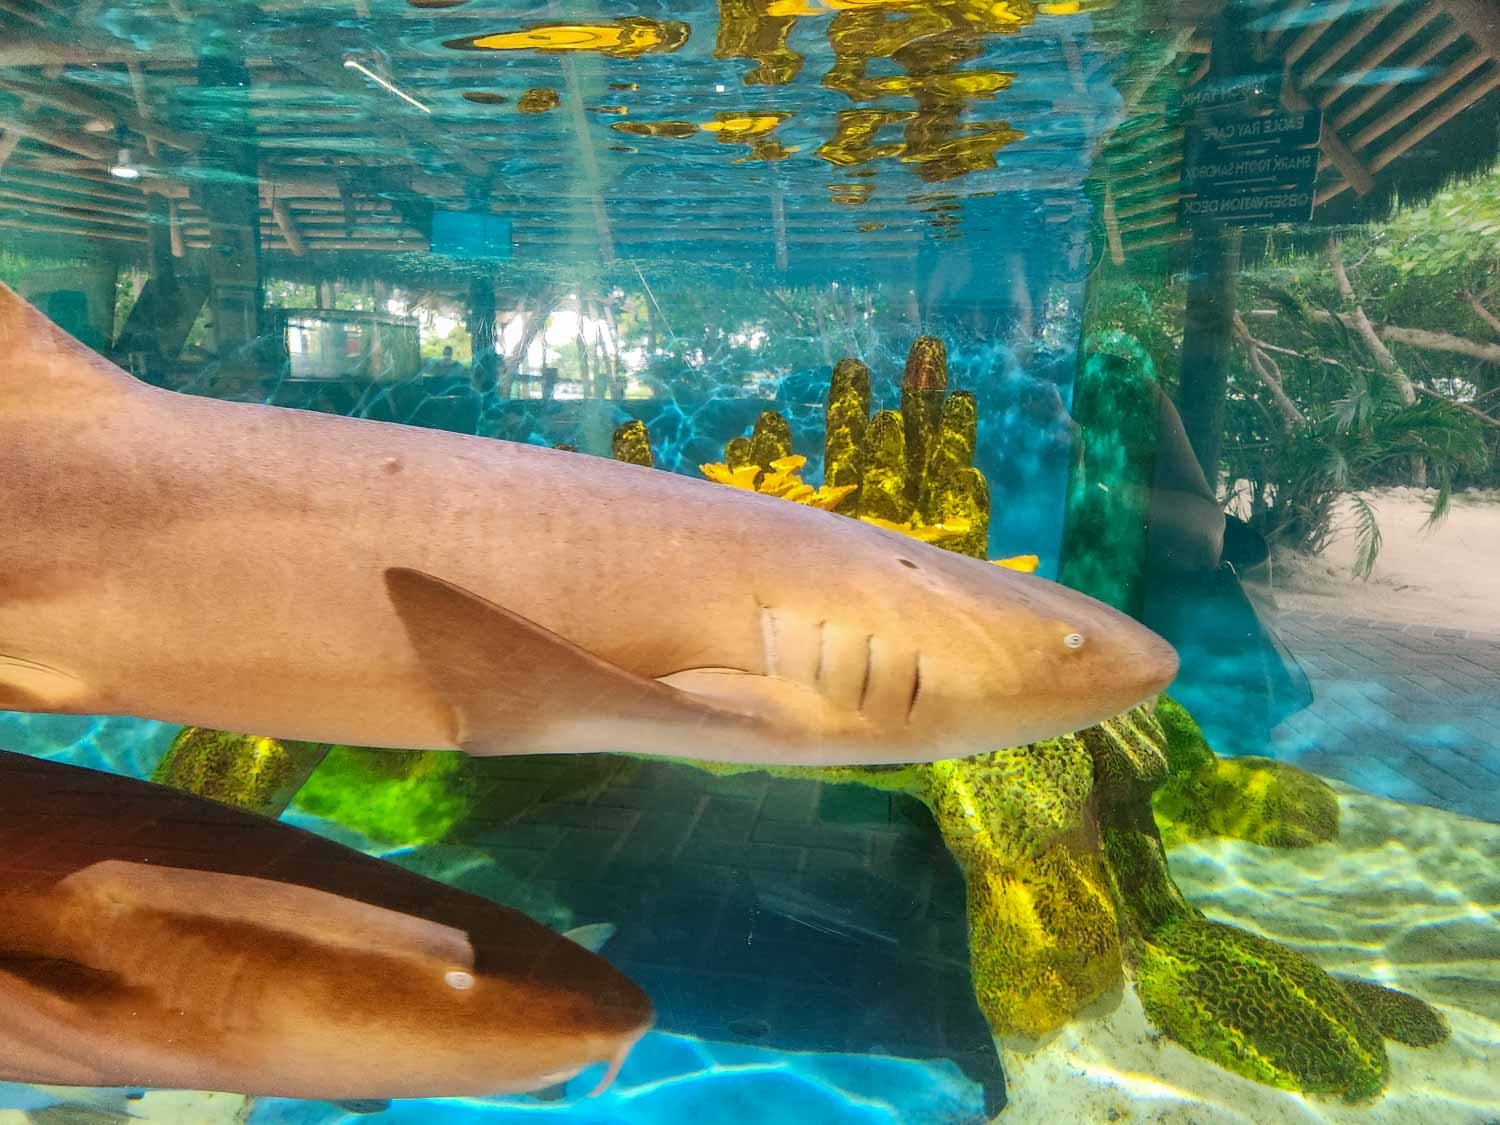 Nurse shark in a tank at Florida Keys Aquarium Encounters, one of the most memorable stops on our Florida Keys itinerary with kids